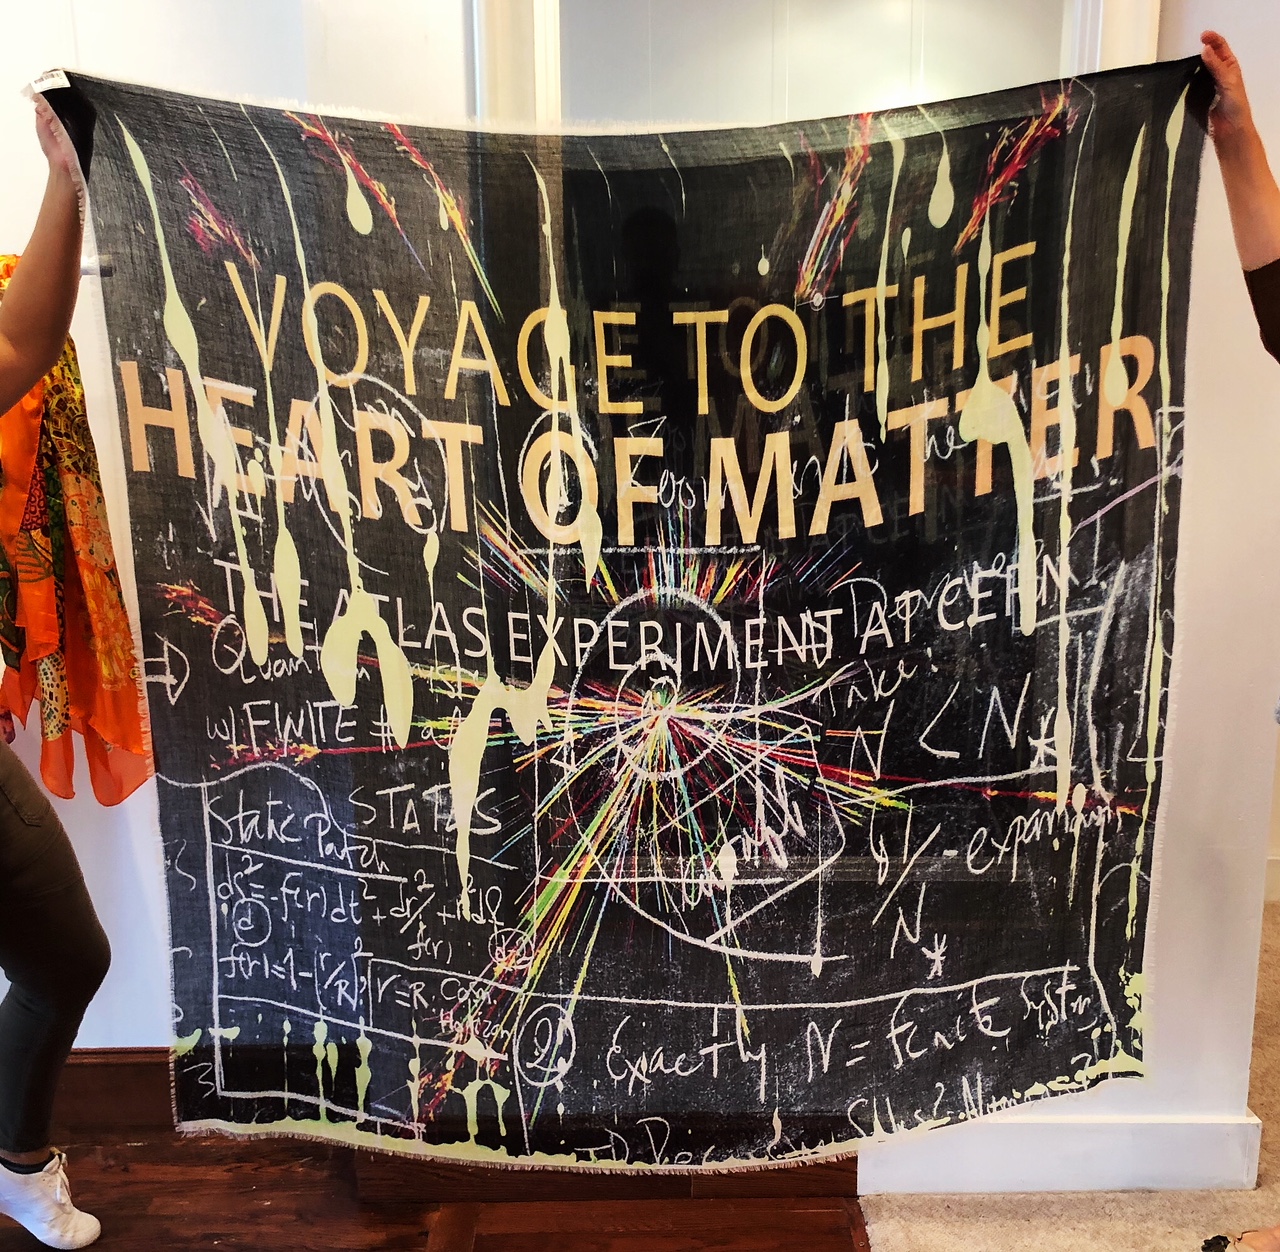 Steve Miller's "Voyage to the Heart of the Matter" scarf by James Paul Cheung Cashmere